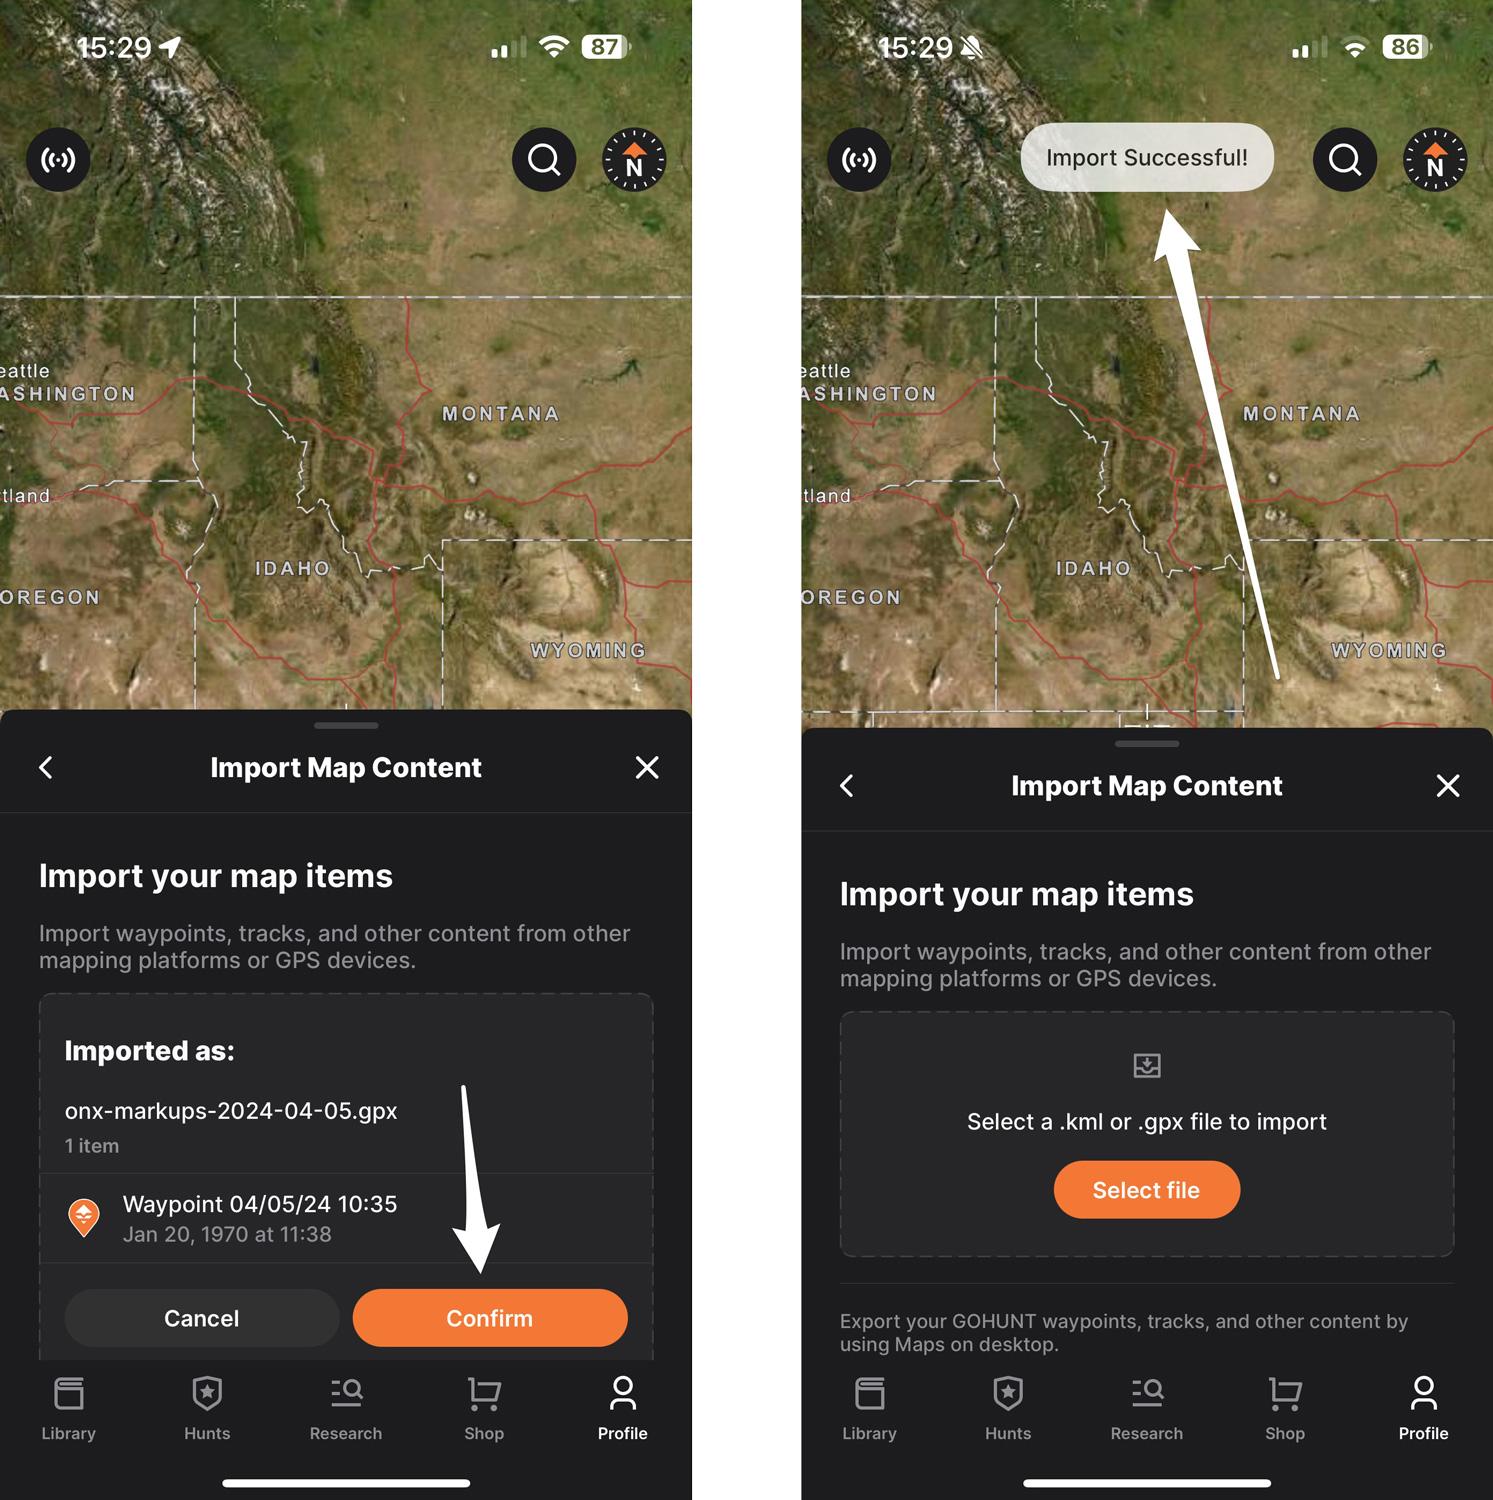 Final steps to import hunting waypoints using mobile app